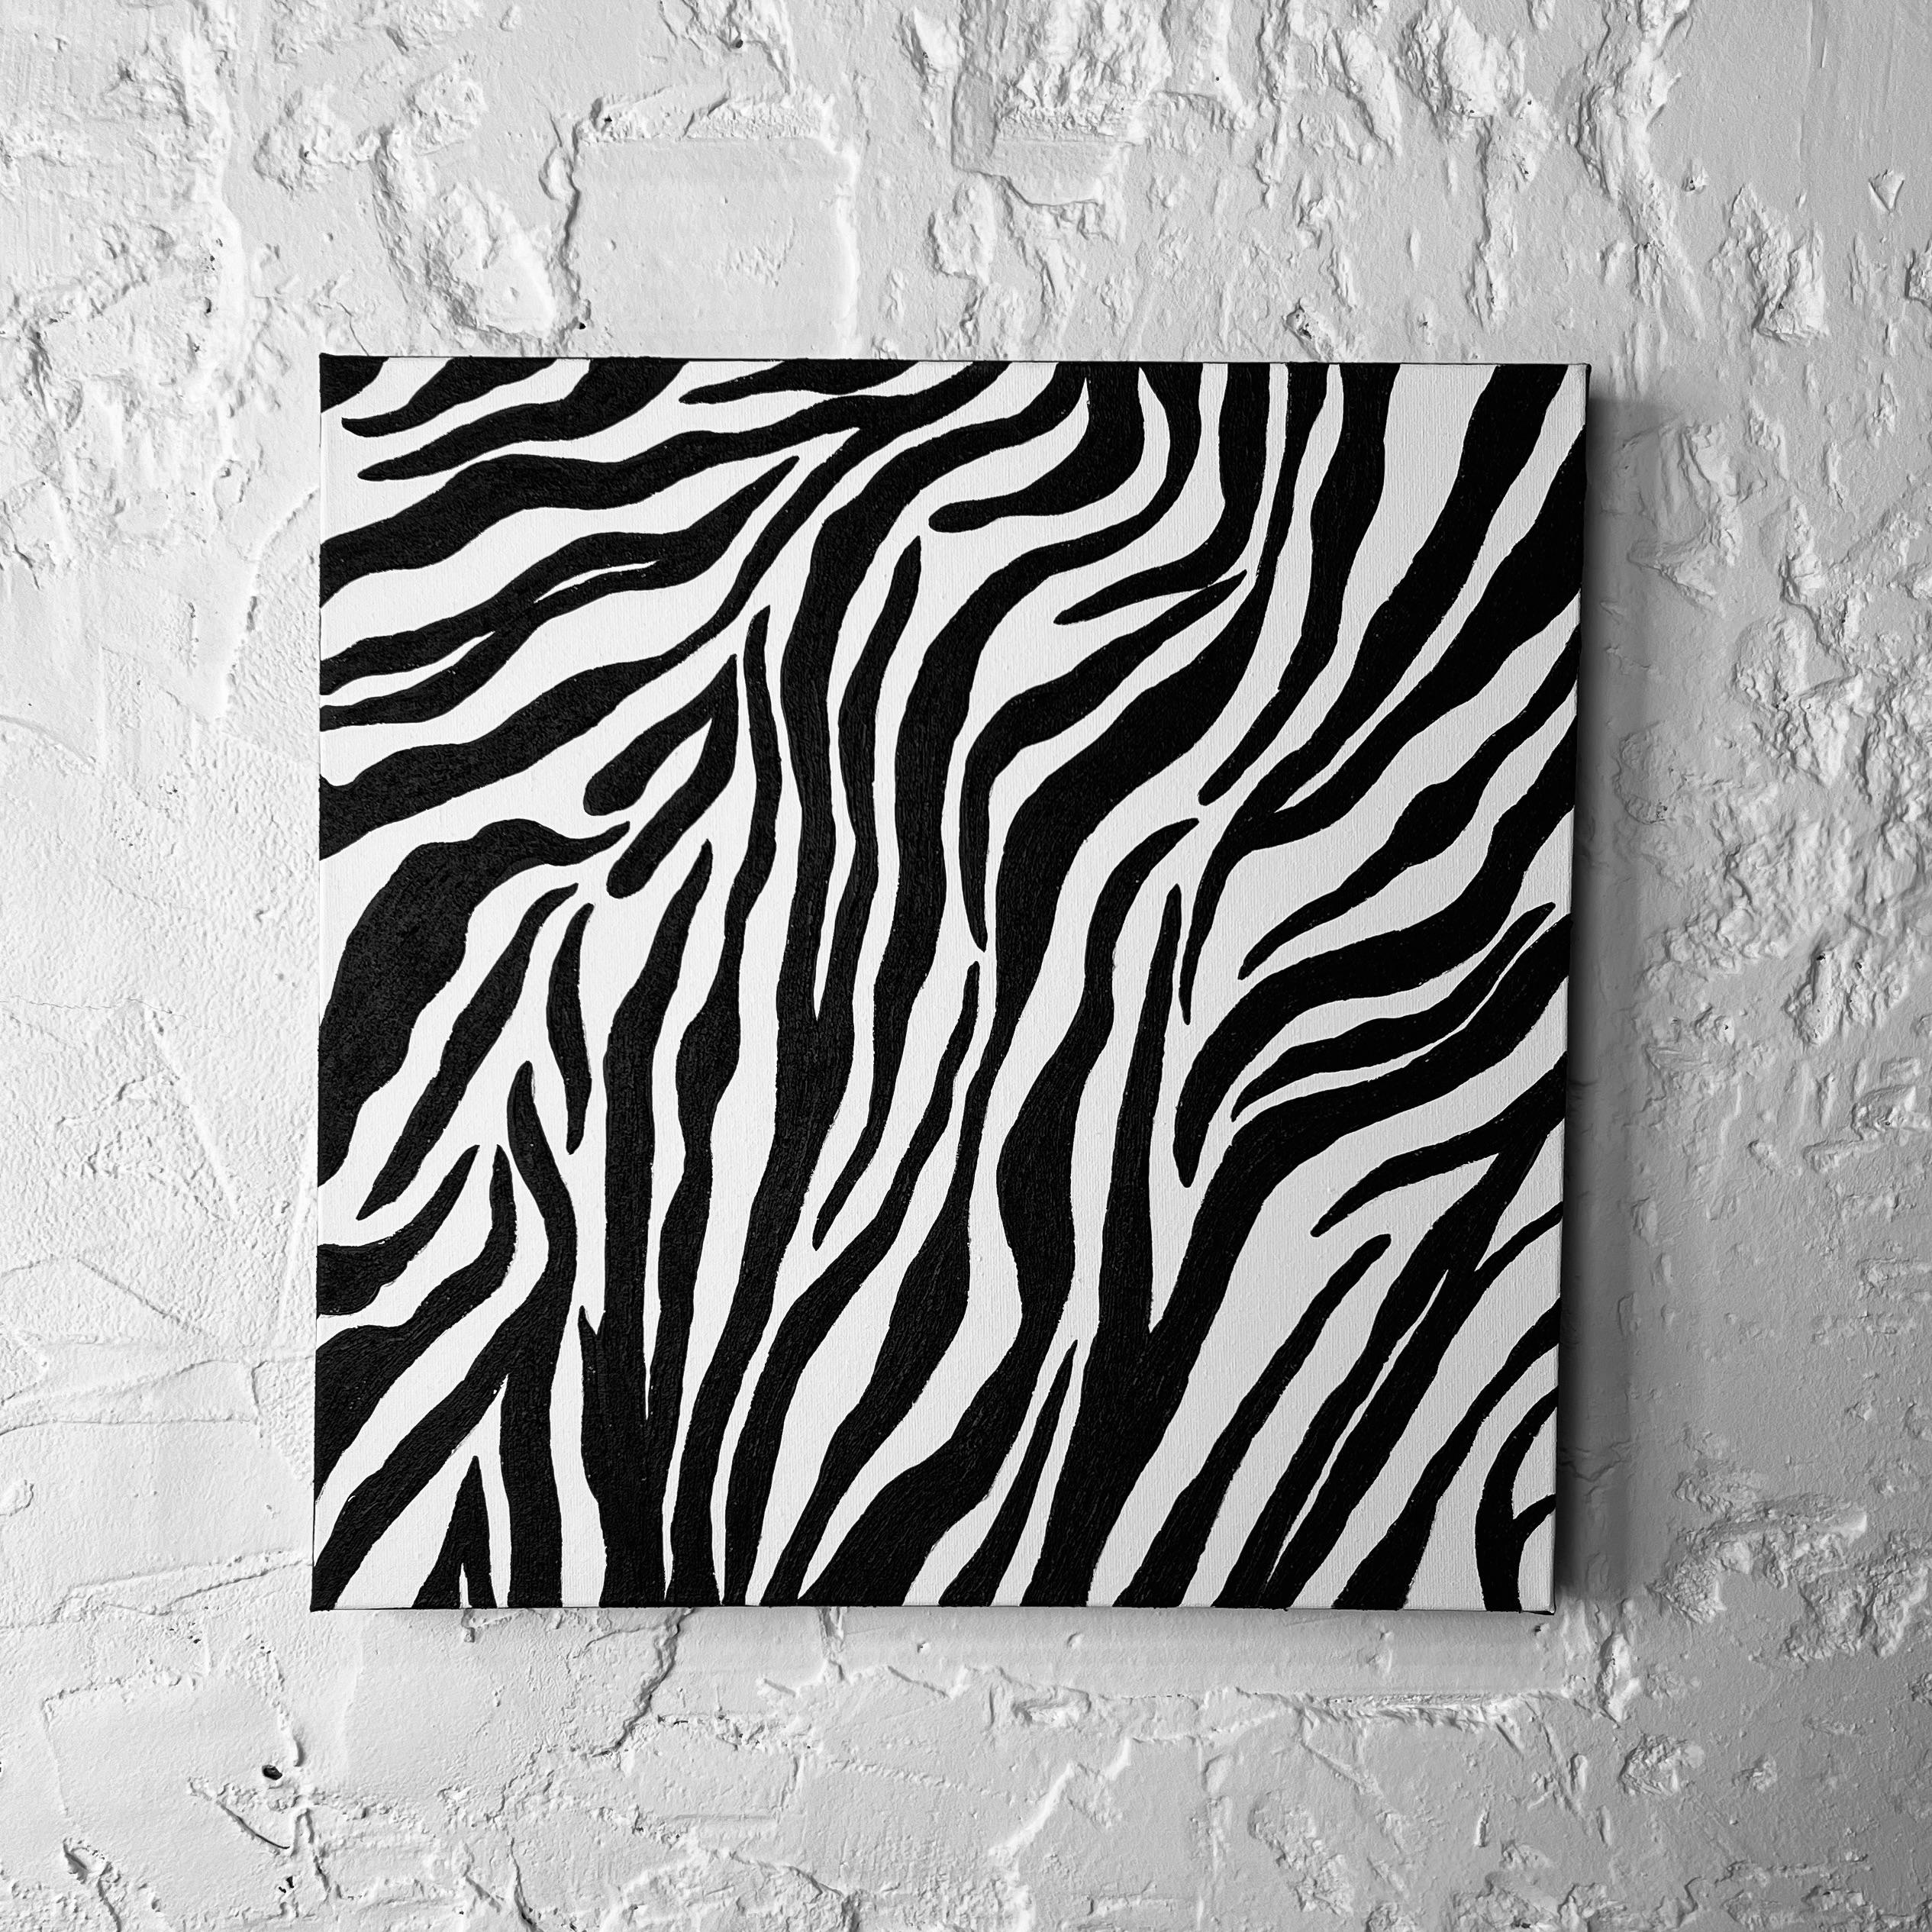 Zebra Pattern - Abstract Sculpture by IRENA TONE